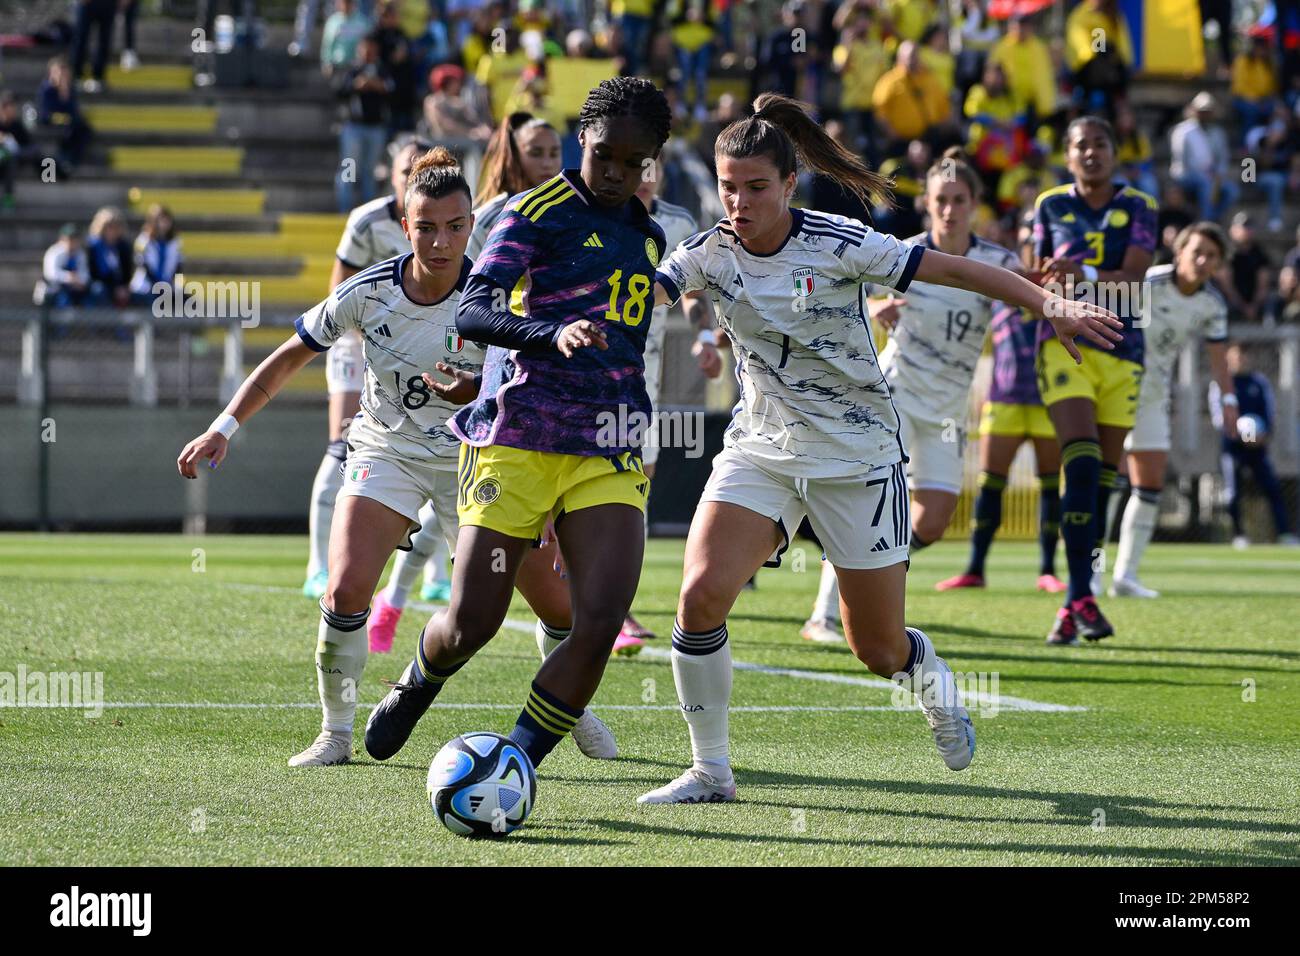 Linda Caicedo of Colombia and Sofia Cantore of Italy during football Match, Stadio Tre Fontane, Italy v, Colombia. 11th Apr, 2023. (Photo by AllShotLive/Sipa USA) Credit: Sipa USA/Alamy Live News Stock Photo